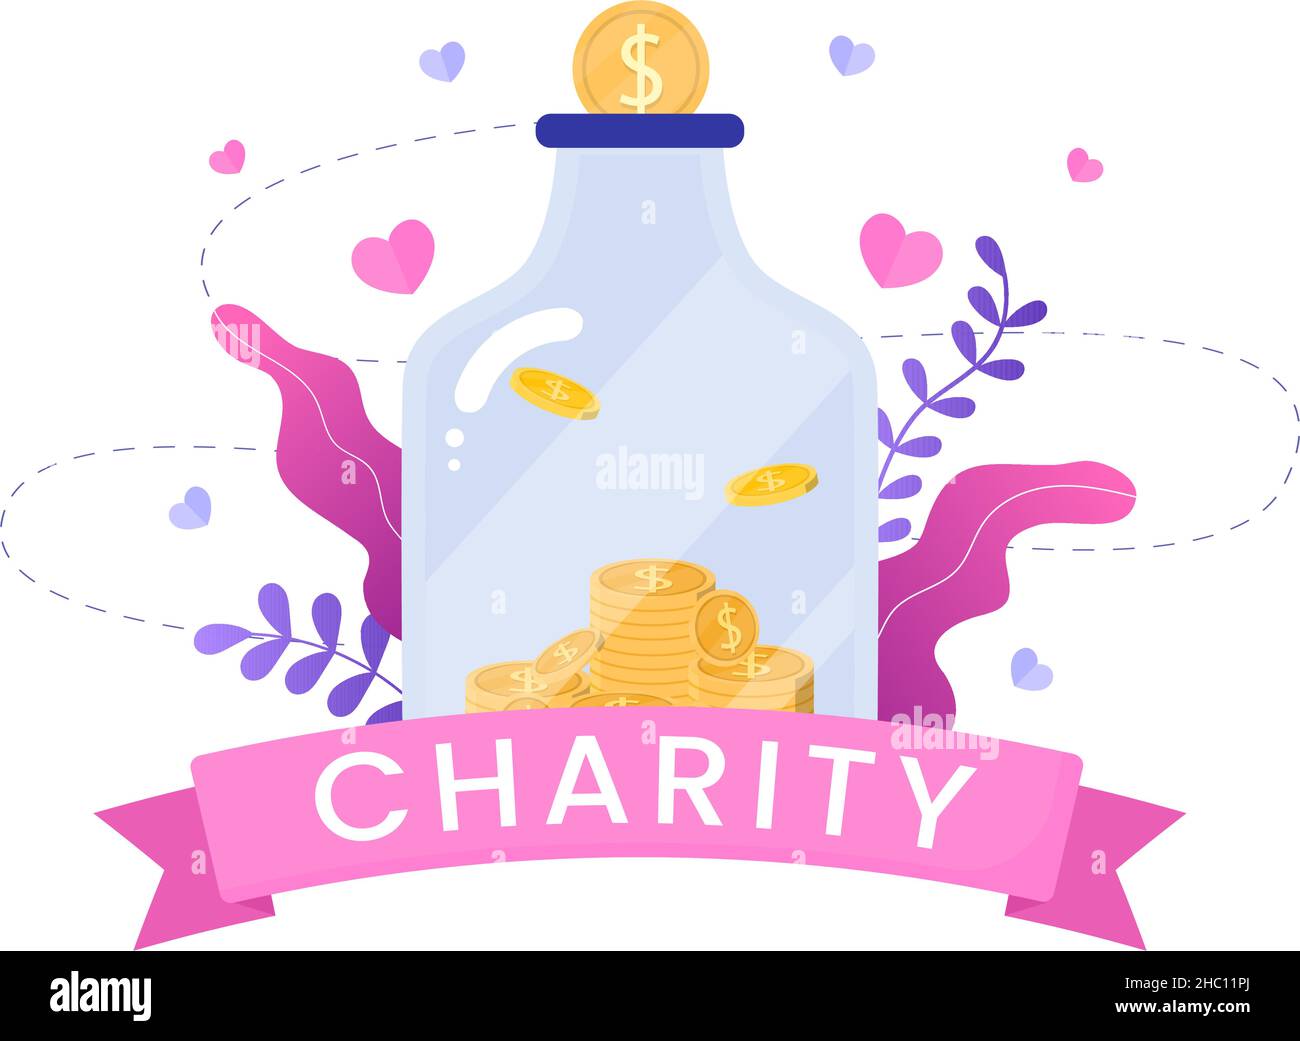 Love Charity or Giving Donation via Volunteer Team Worked Together to Help and Collect Donations for Poster or Banner in Flat Design Illustration Stock Vector